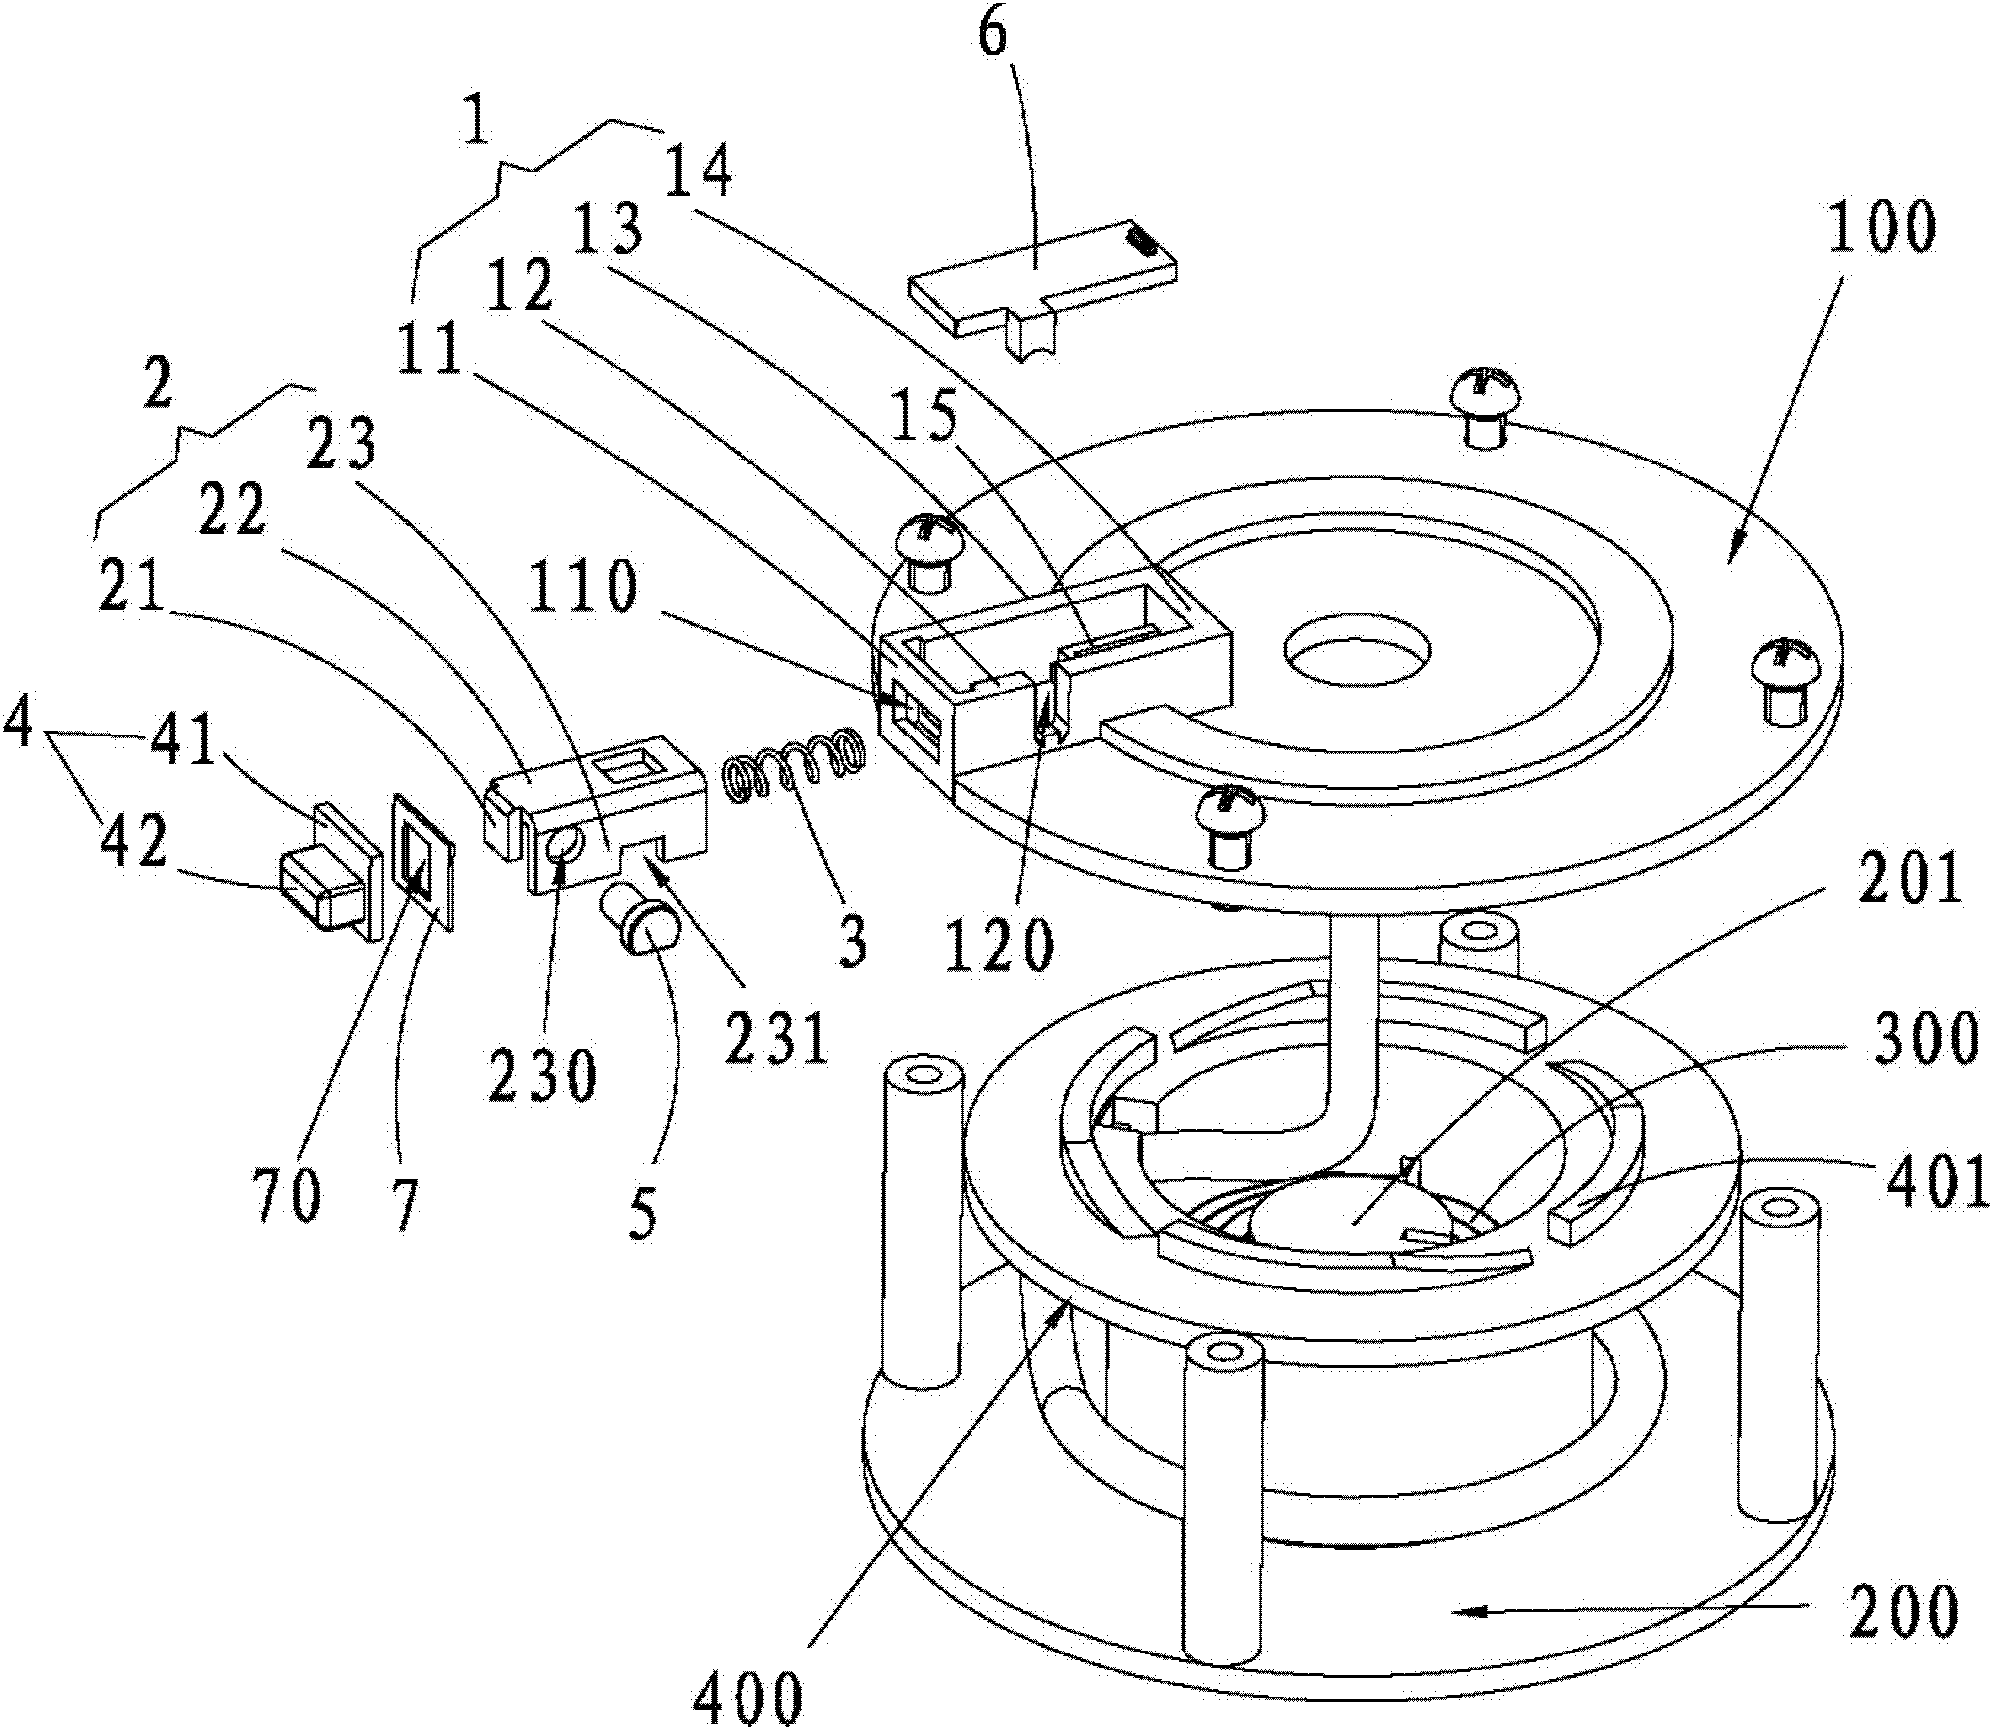 Limiting button structure and wire spool